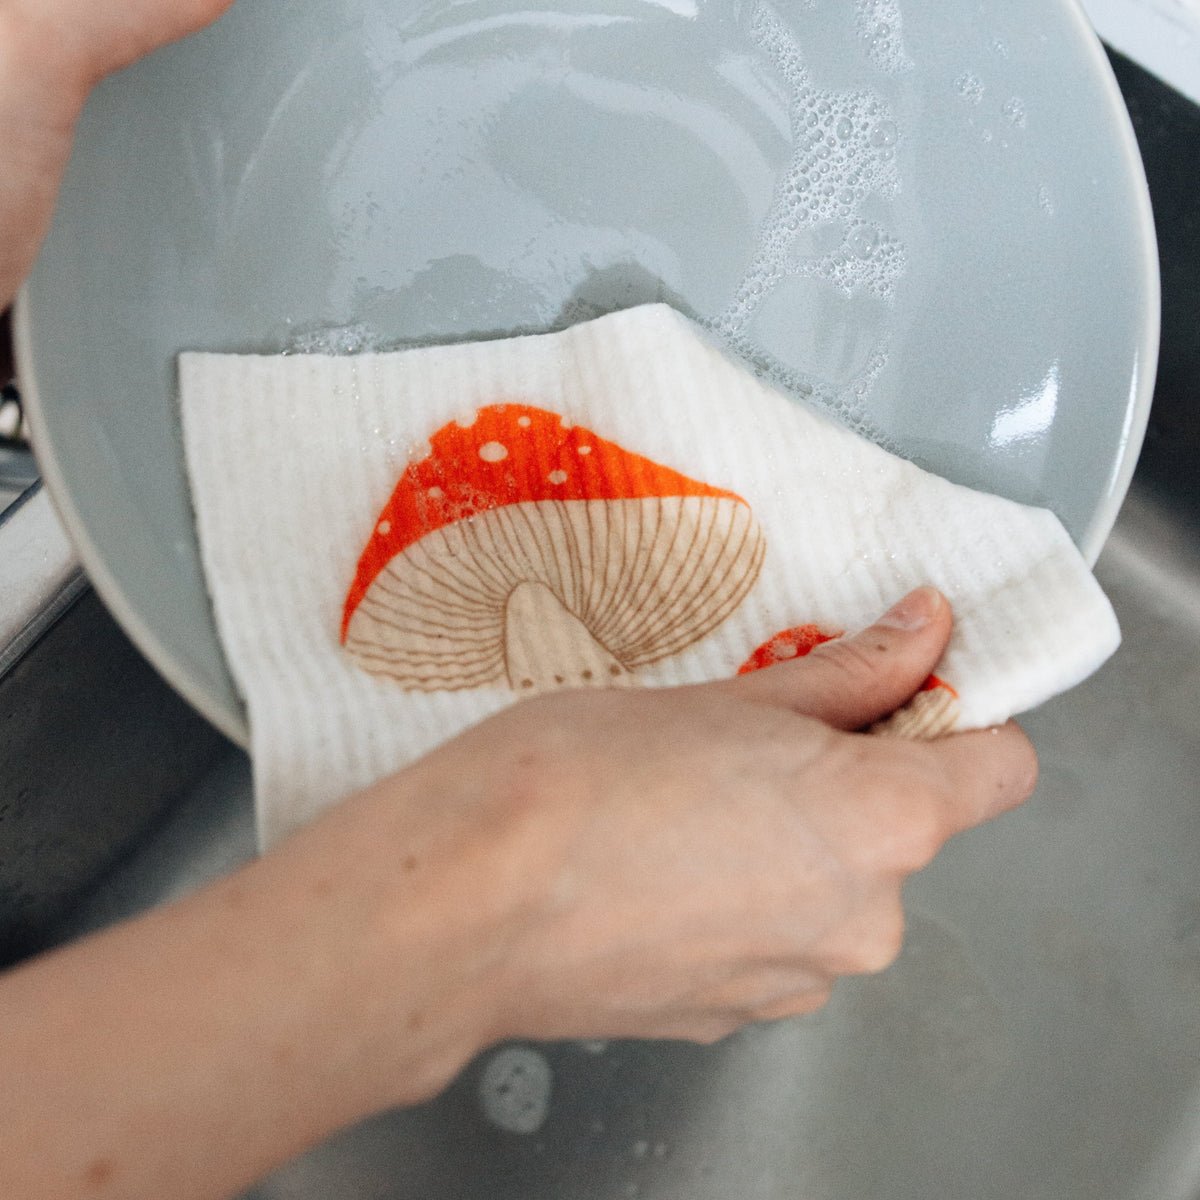 3 Quick Tips to Get The Most Life Out of Your Swedish Dishcloth